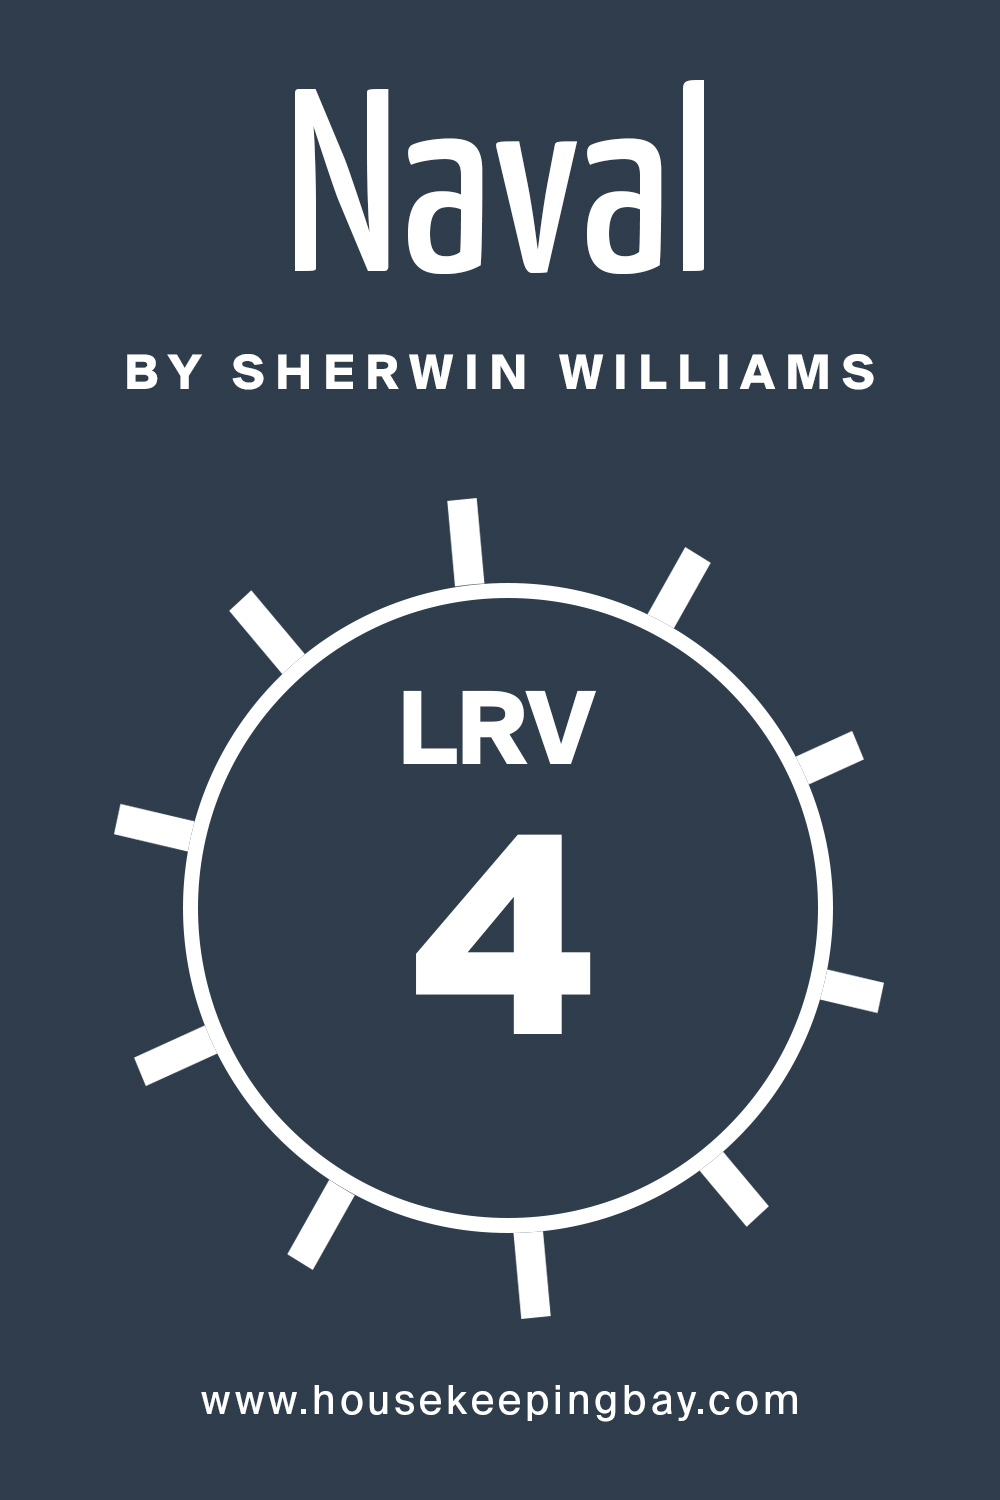 Naval by Sherwin Williams. LRV – 4